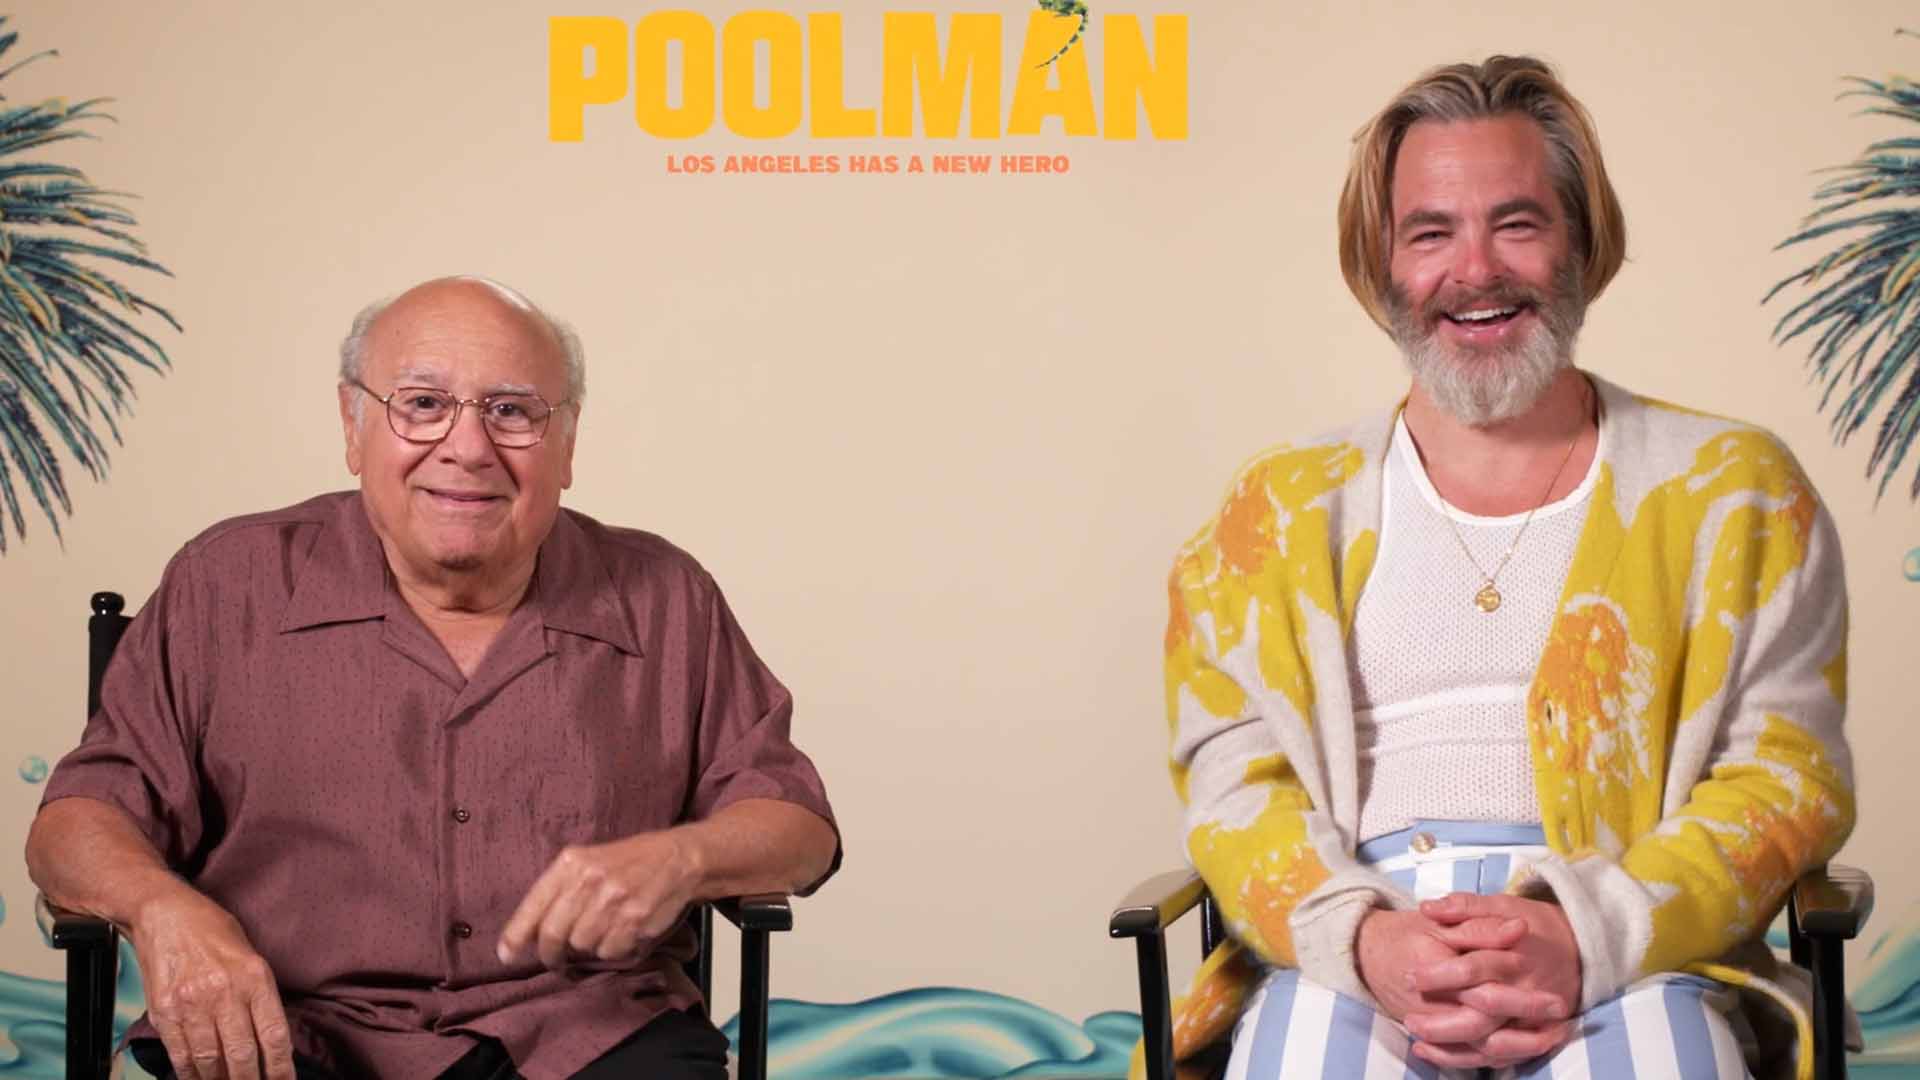 Chris Pine Reveals His ‘Poolman’ Wardrobe Is ‘A Lot’ Of His ‘Own Clothes’